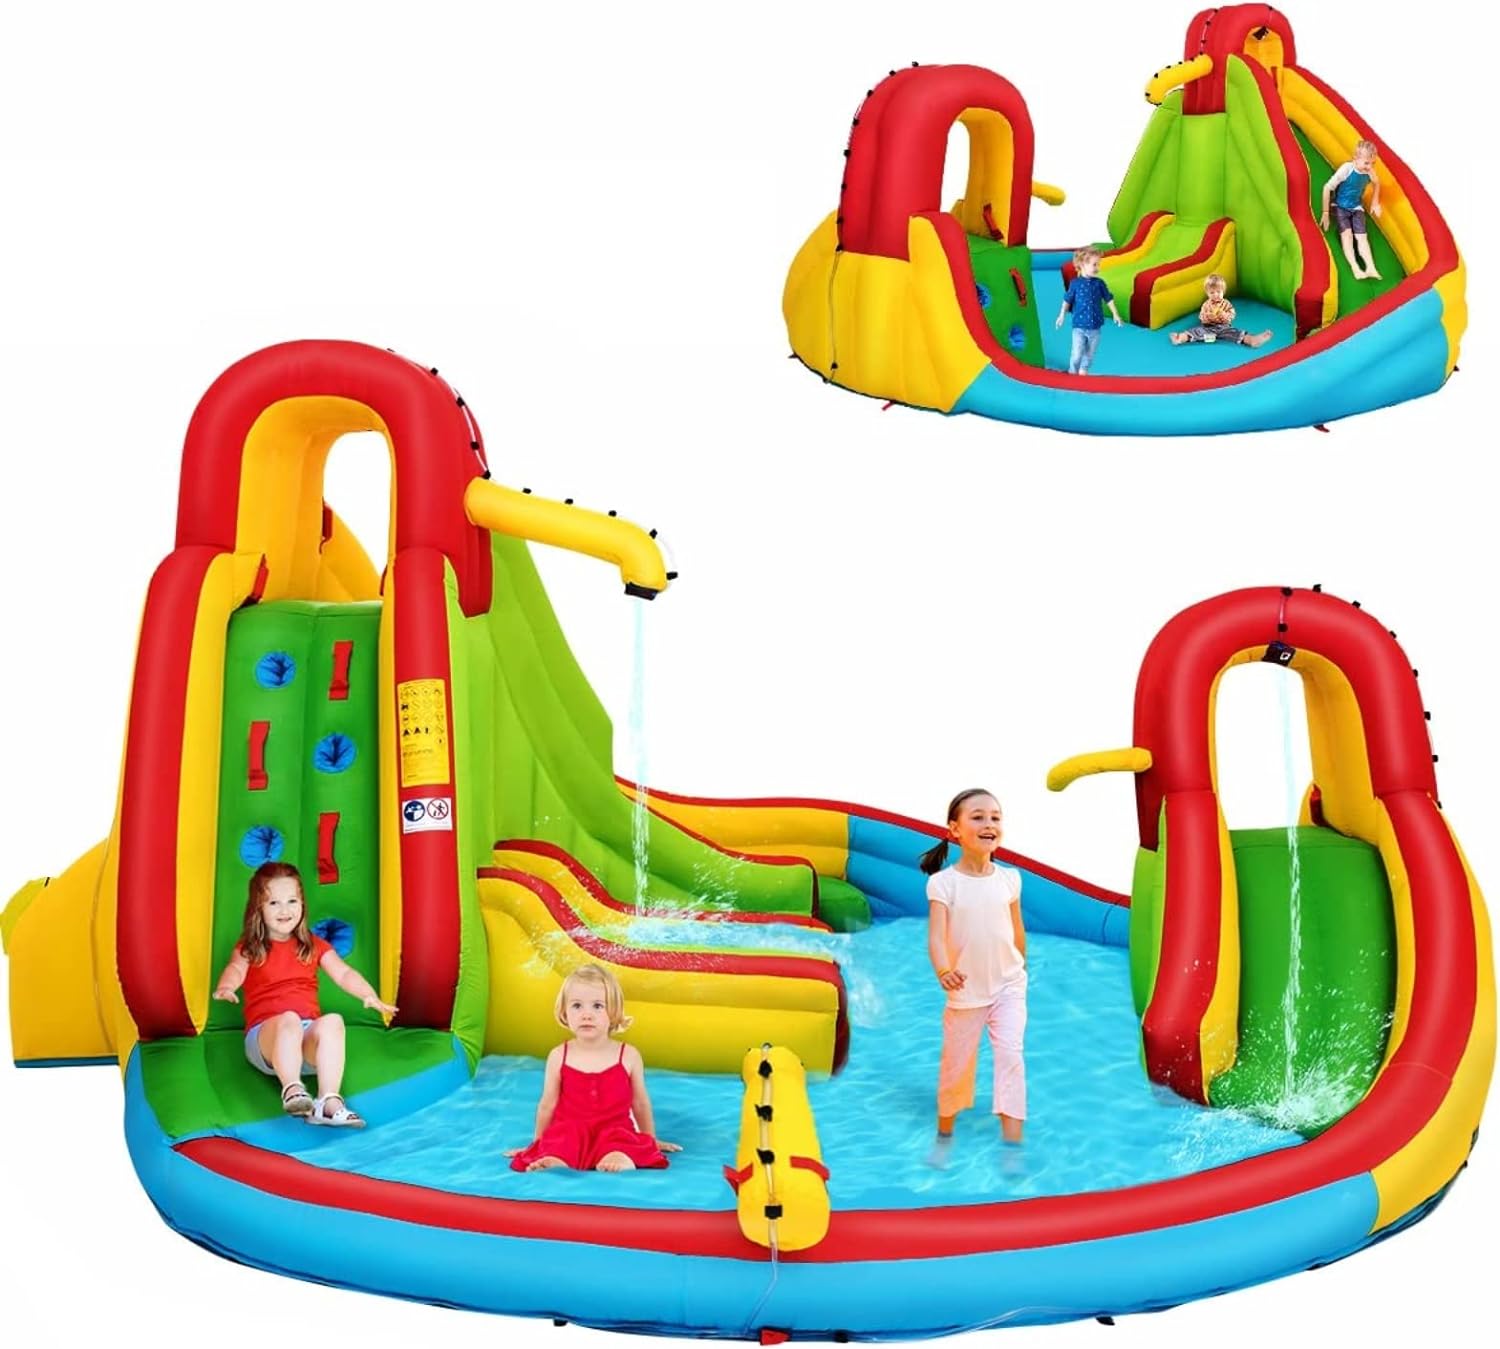 Costzon Inflatable Water Slide, Mega Waterslides for Kids Family Fun with Dual Slides & Climbing Walls, Large Splash Pool, Water Slides Inflatables for Kids and Adults Outdoor Backyard Party Gifts